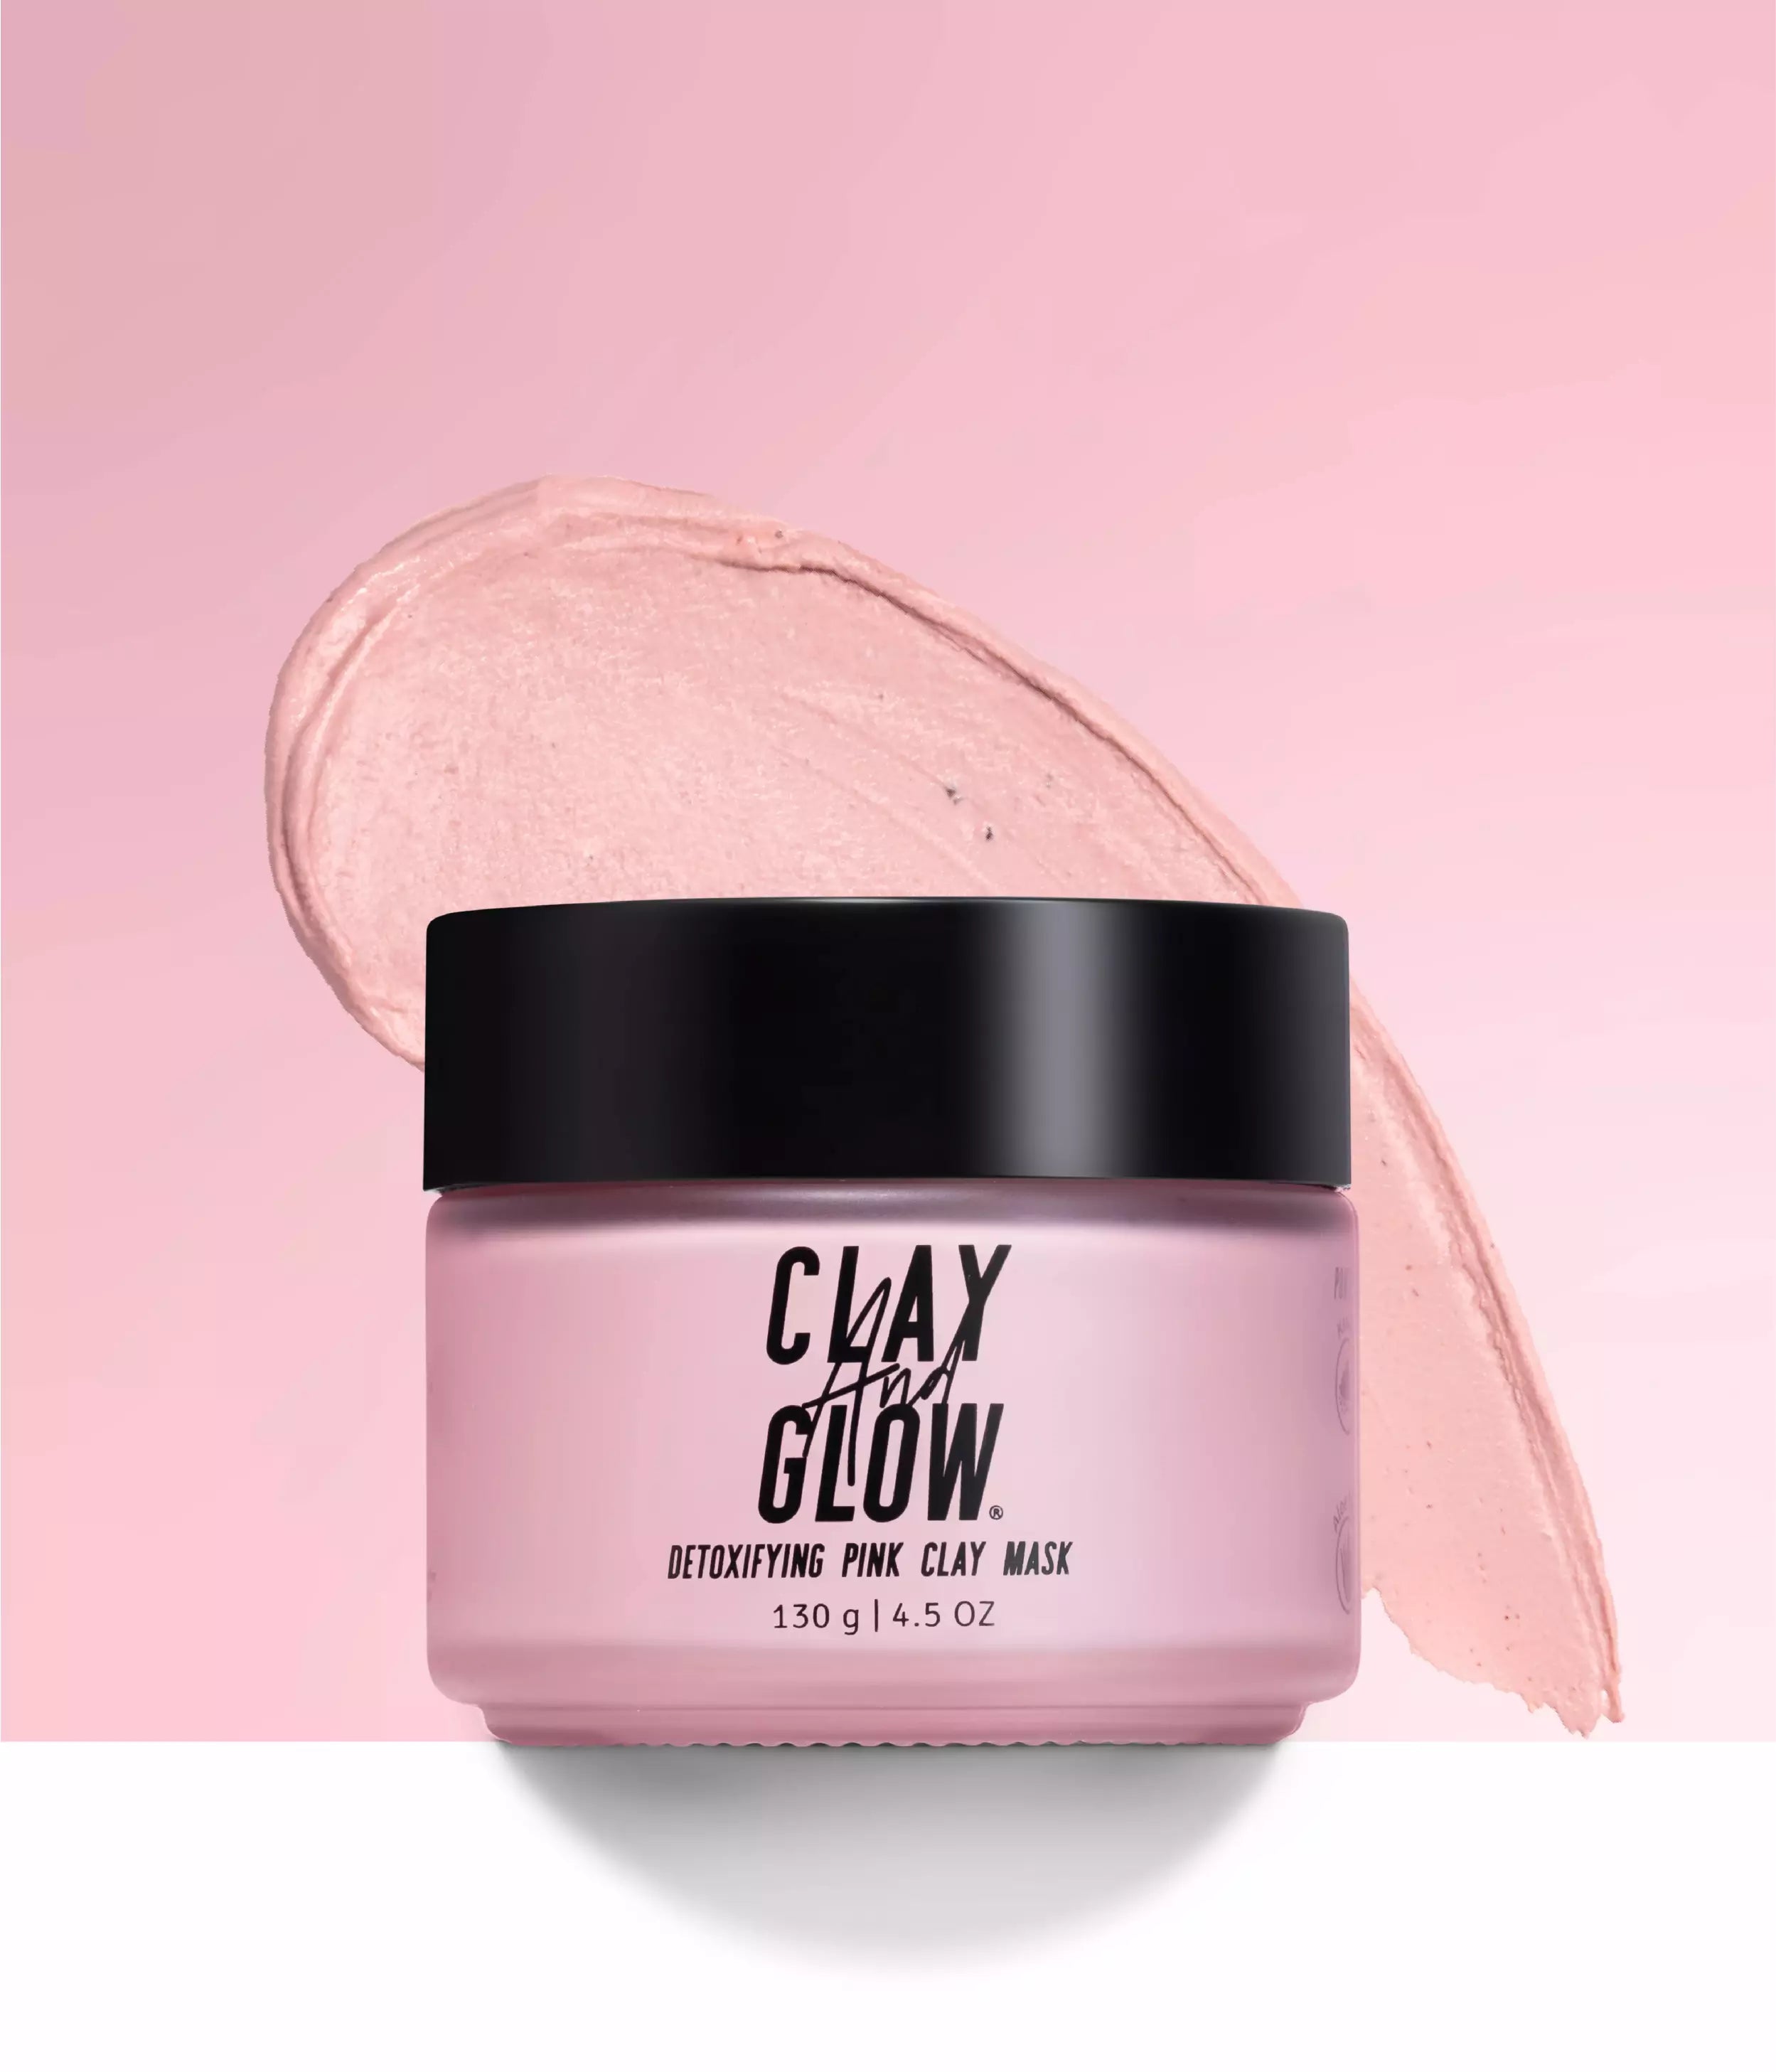 FREE Pink Clay Mask